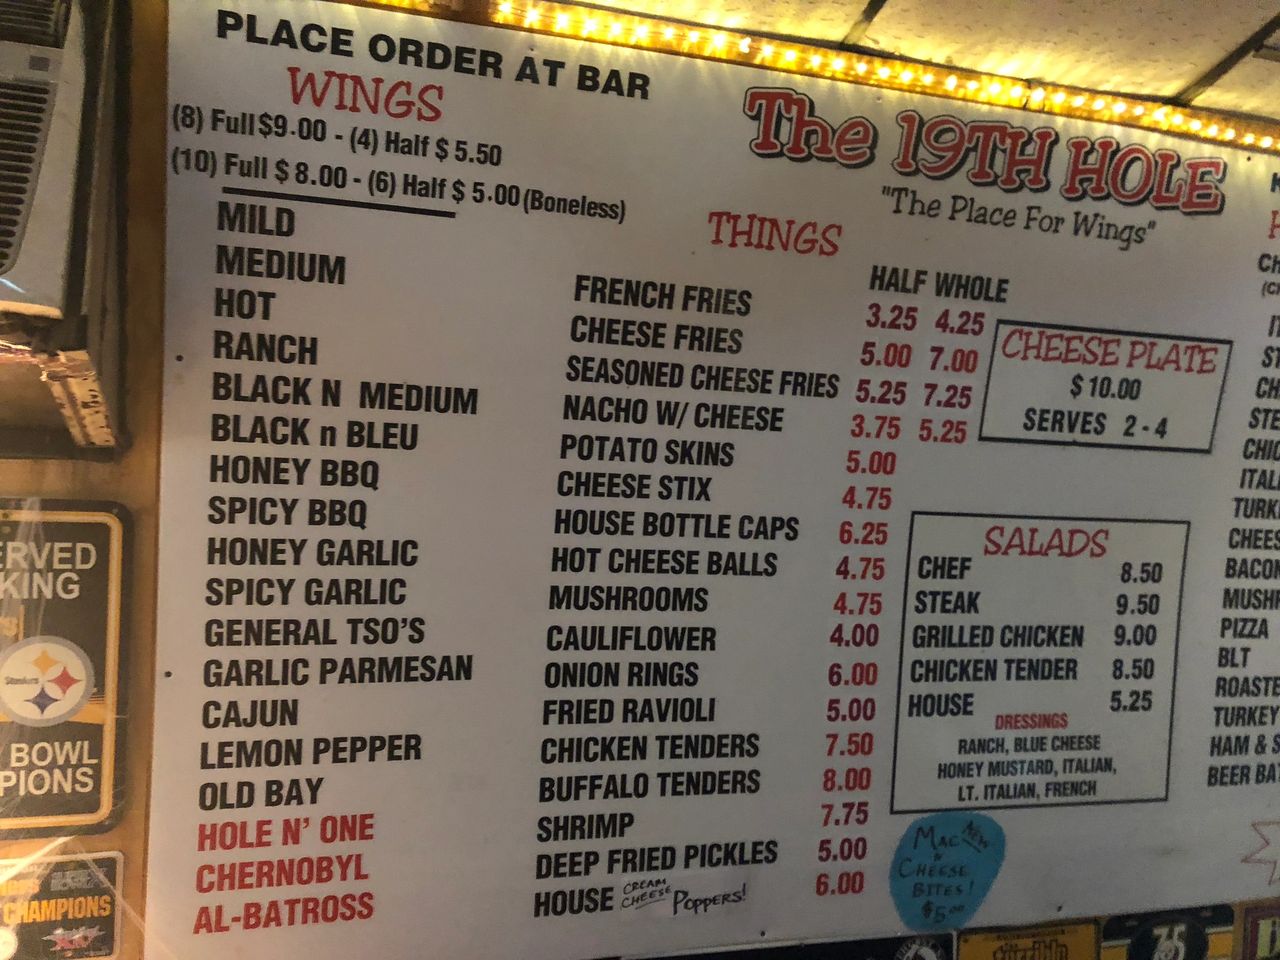 Wing menu at the 19th Hole on the National Road in Whelling, WV.